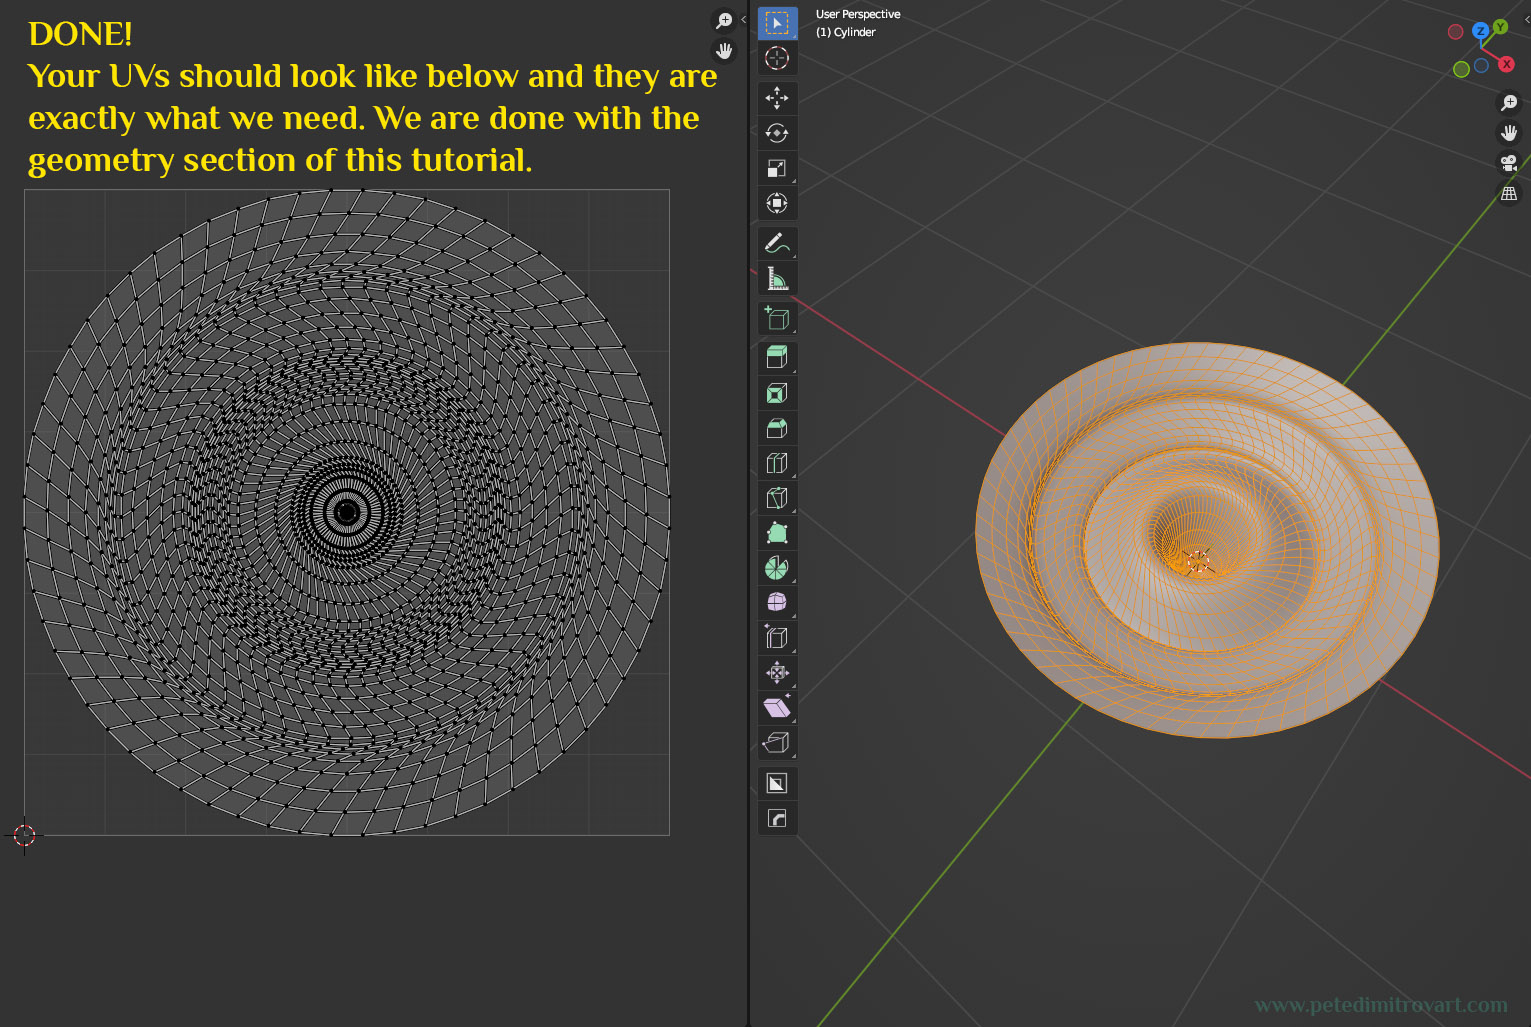 Image displaying the finalized UVs to the left of the screen. On the right of the screen is the geometry selected. The UVs look incredibly dense and like a large circle fit into the UVs quadrant.